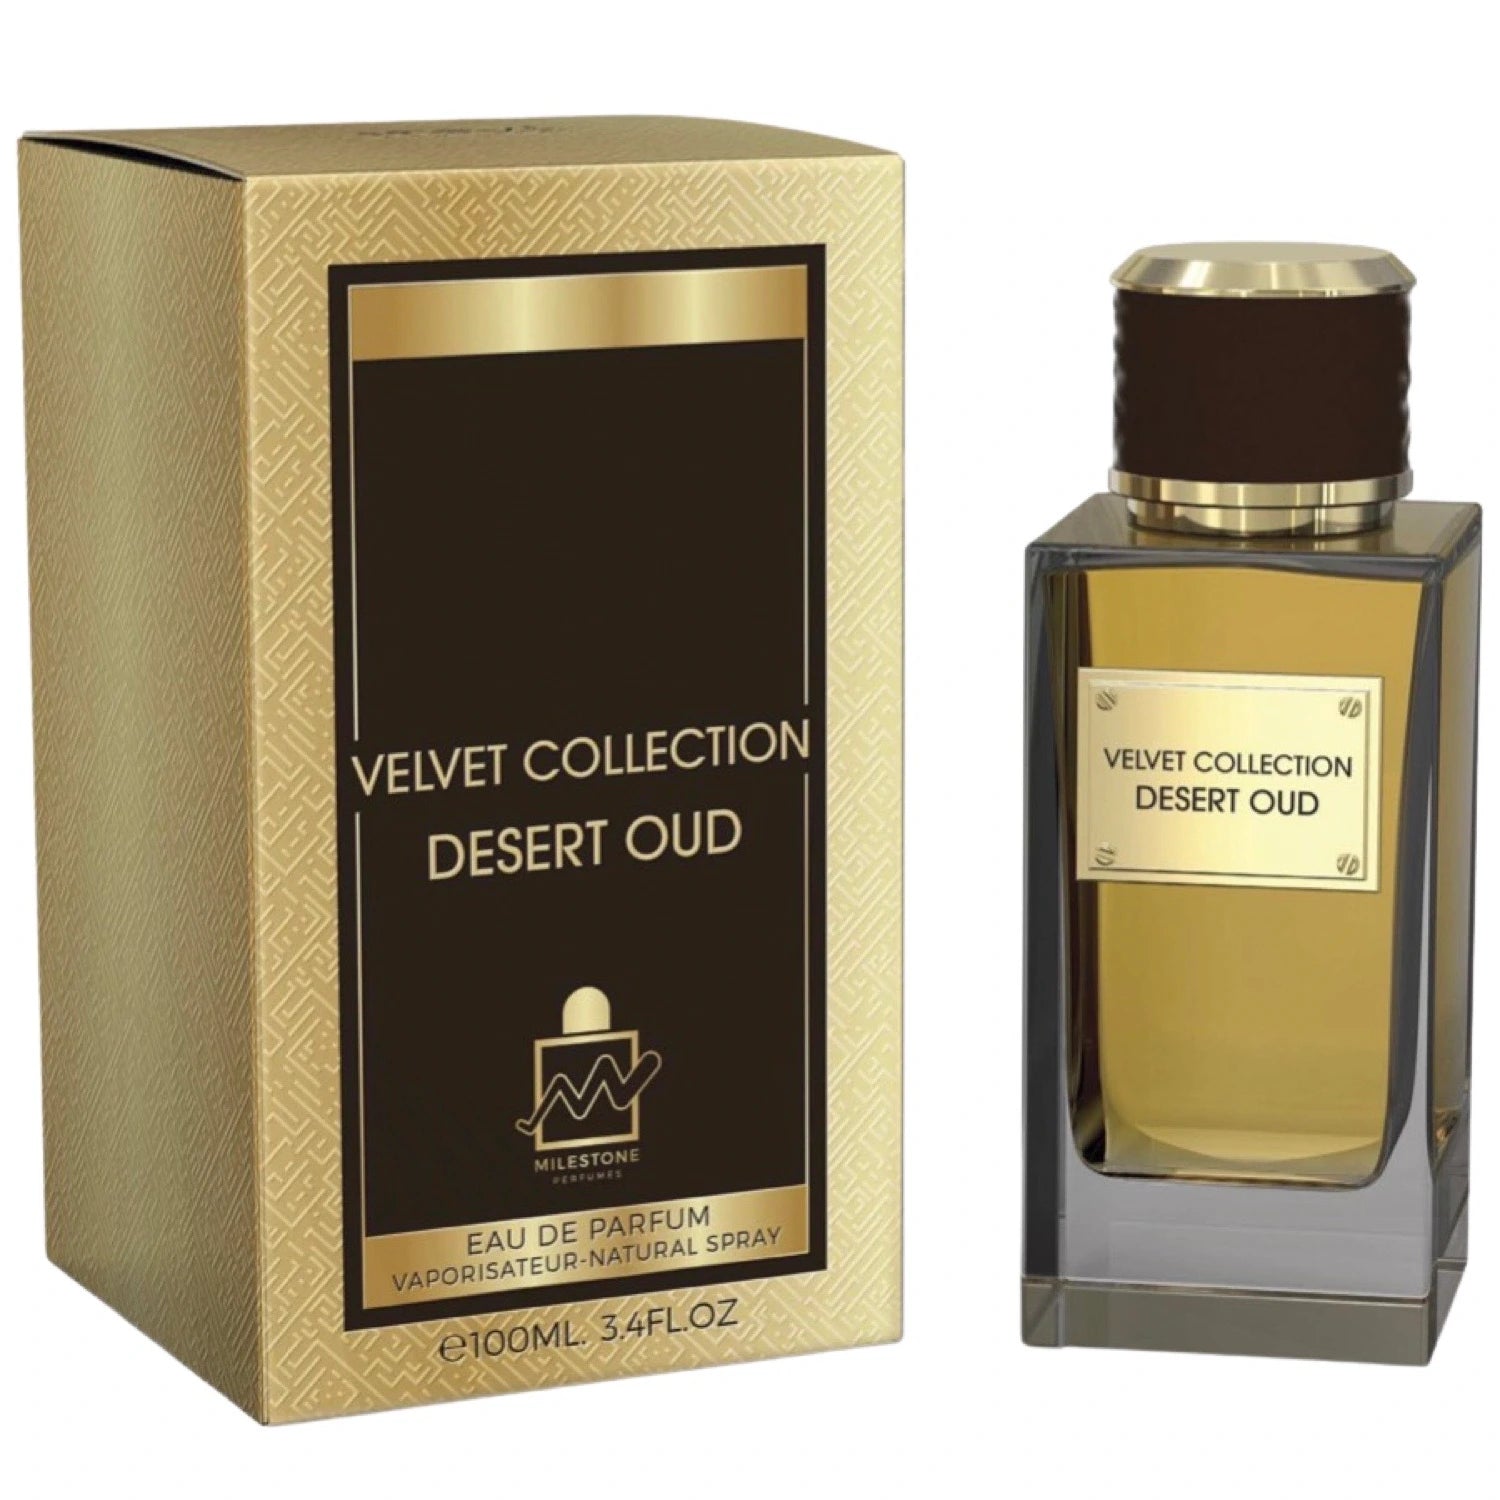 <p data-mce-fragment="1"><em>INSPIRED BY</em> <strong>DOLCE &amp; GABBANA VELVET DESERT OUD</strong></p>
<p data-mce-fragment="1">Transport yourself to the majestic Middle Eastern dunes with Velvet Desert Oud, an intoxicating and velvety EDP that combines the timeless scent of incense with rich smoky wood and mysterious deep ambery notes. Draped in a sensual musk, it will ultimately conquer your senses like a comforting victory.</p>